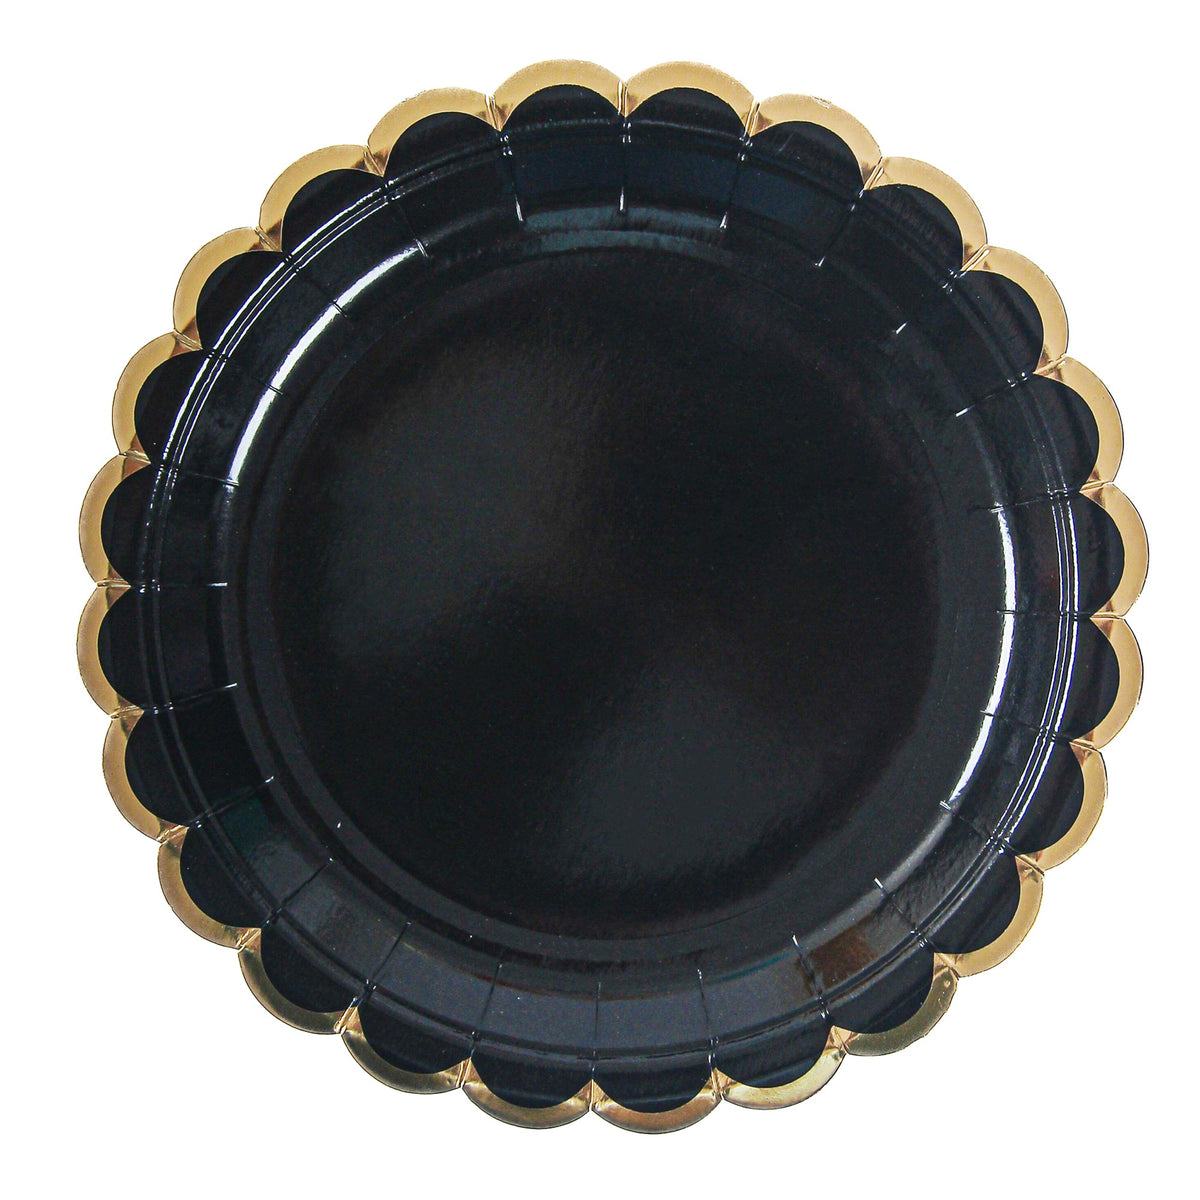 YIWU SANDY PAPER PRODUCTS CO., LTD Everyday Entertaining Black Flower Edge Large Lunch Paper Plates, 9 Inches, 8 Count